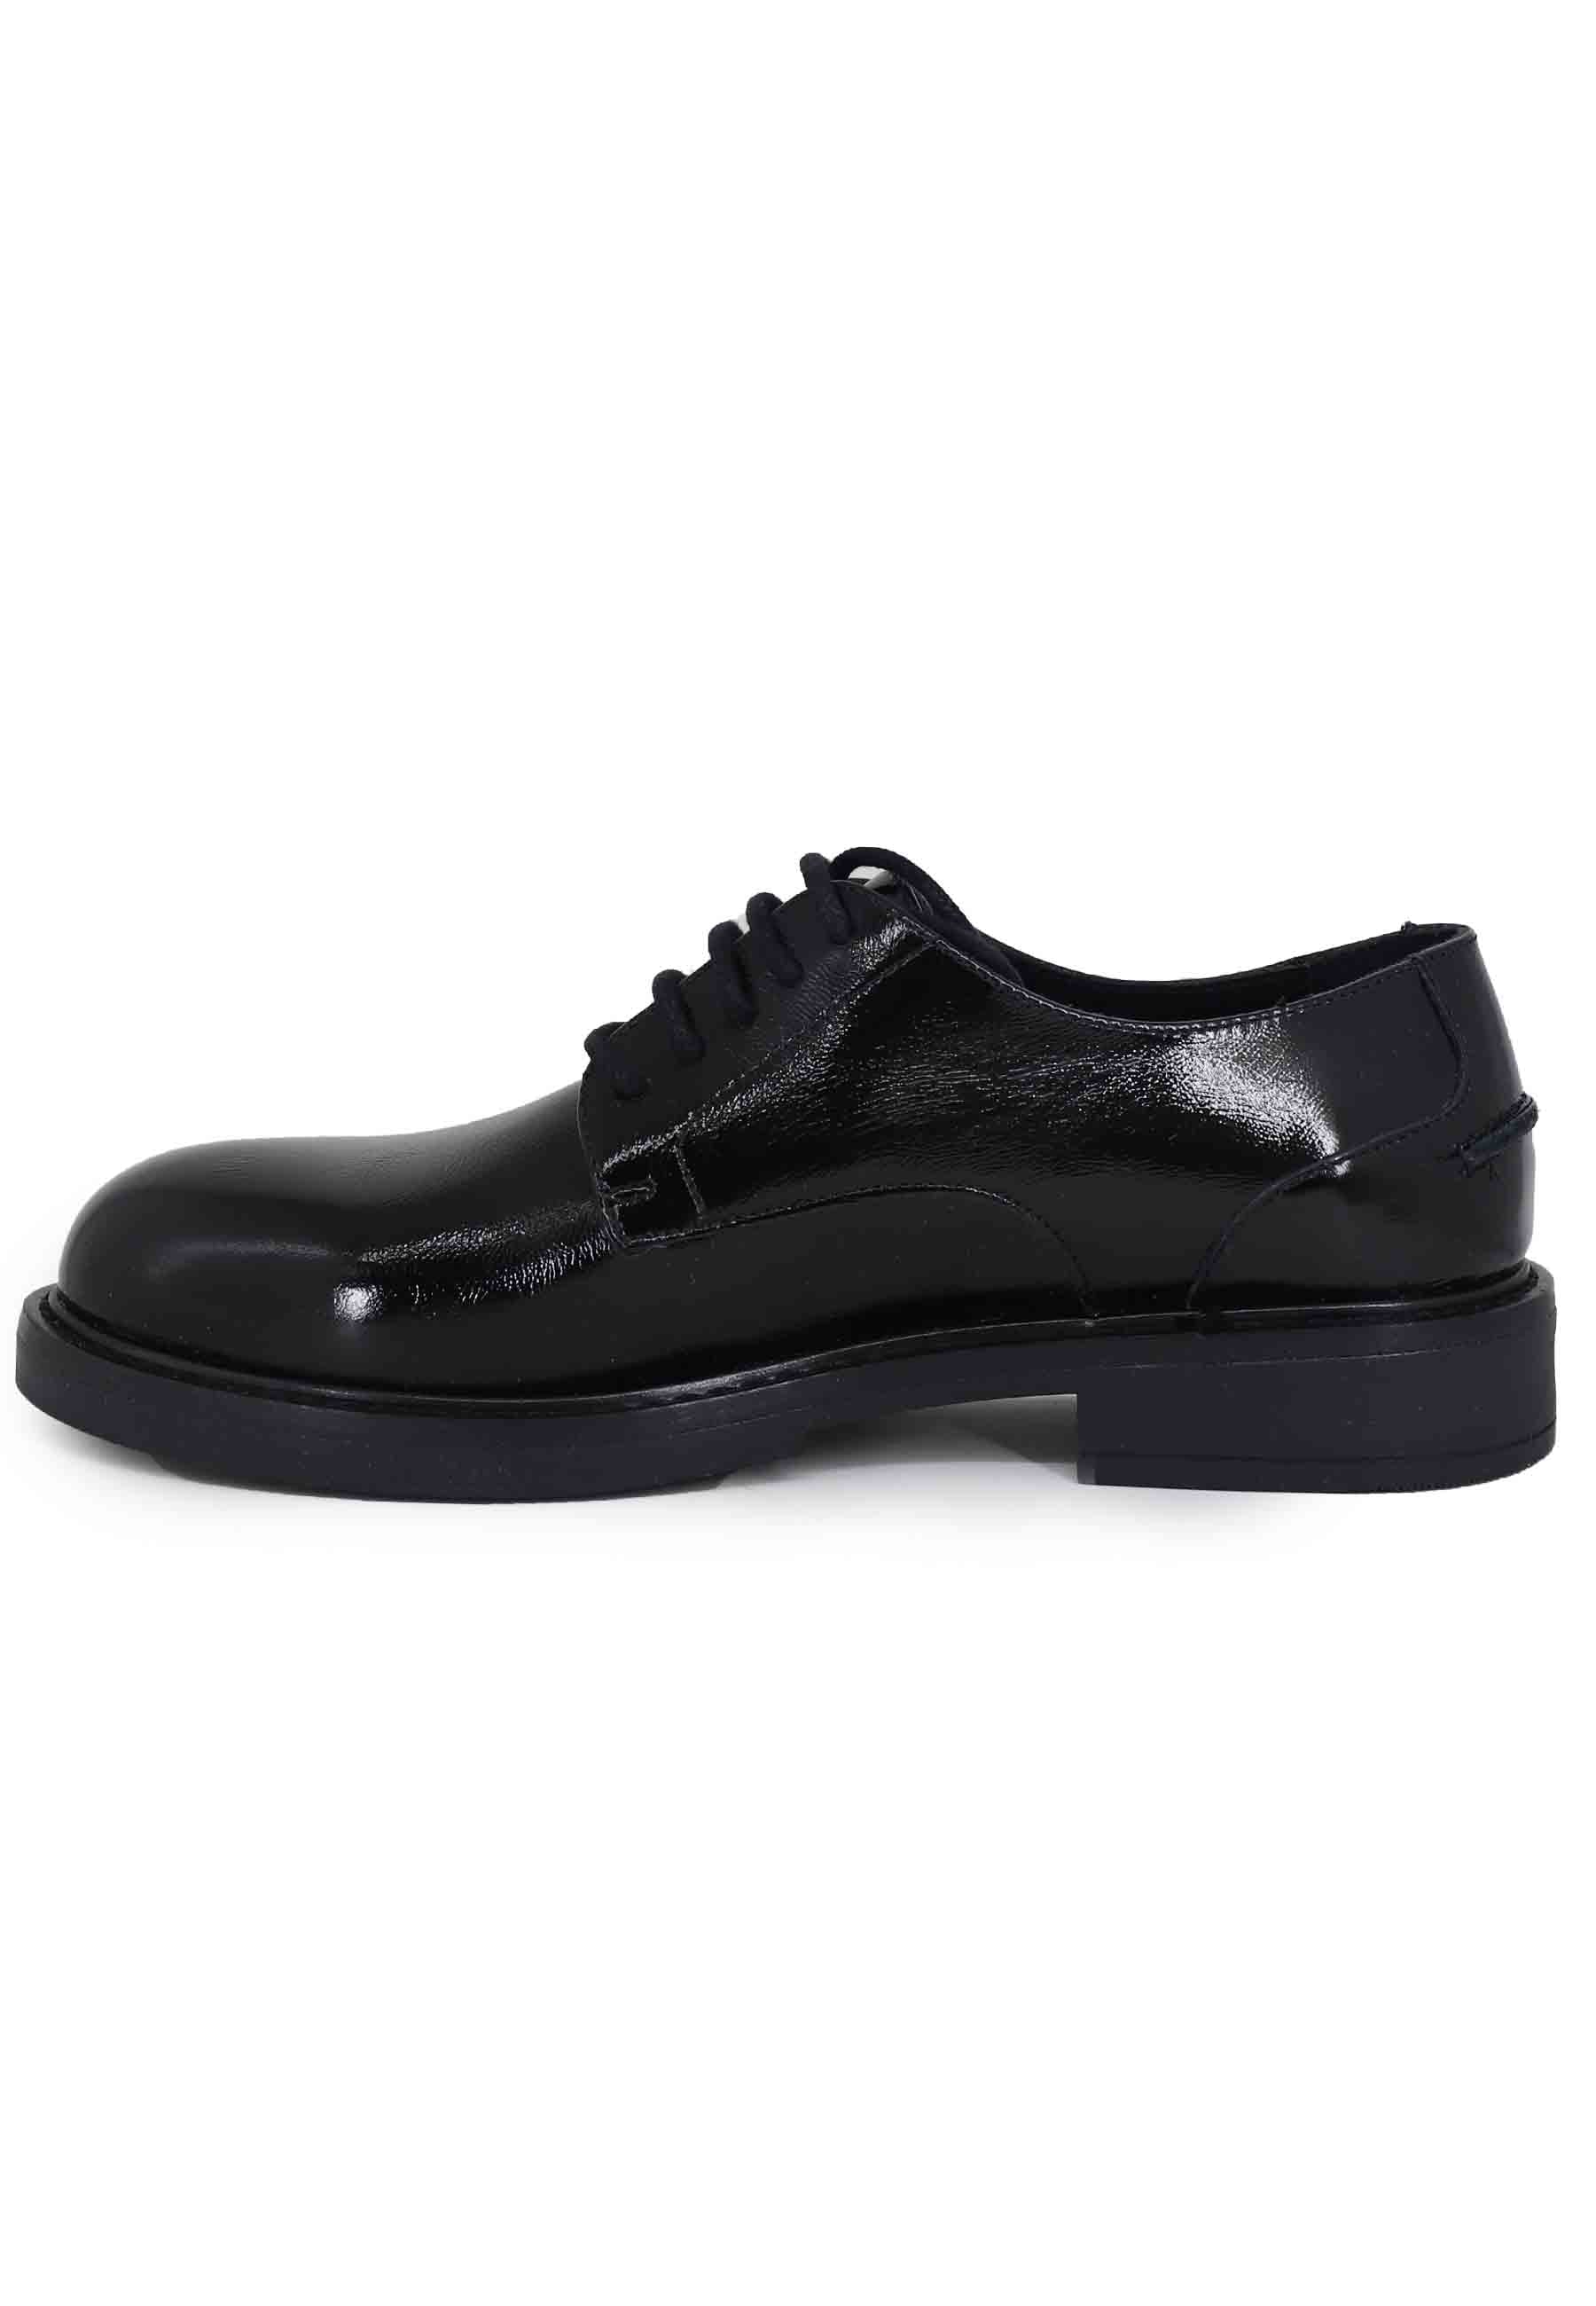 Women's lace-ups in black naplack leather with rubber sole and low heel